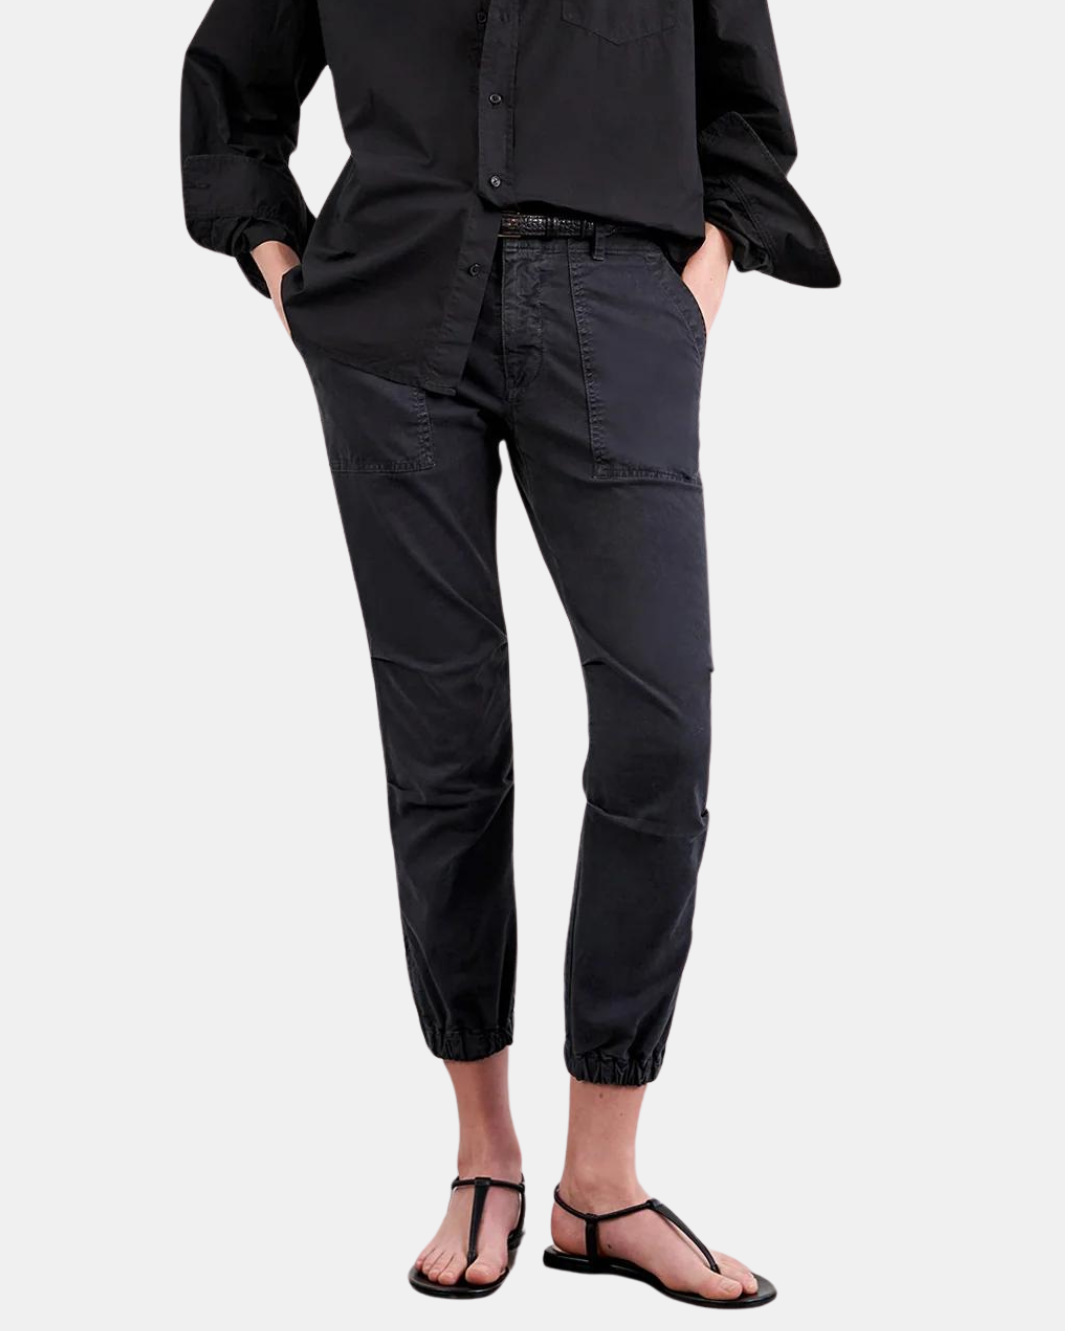 CROPPED MILITARY PANT IN CARBON - Romi Boutique